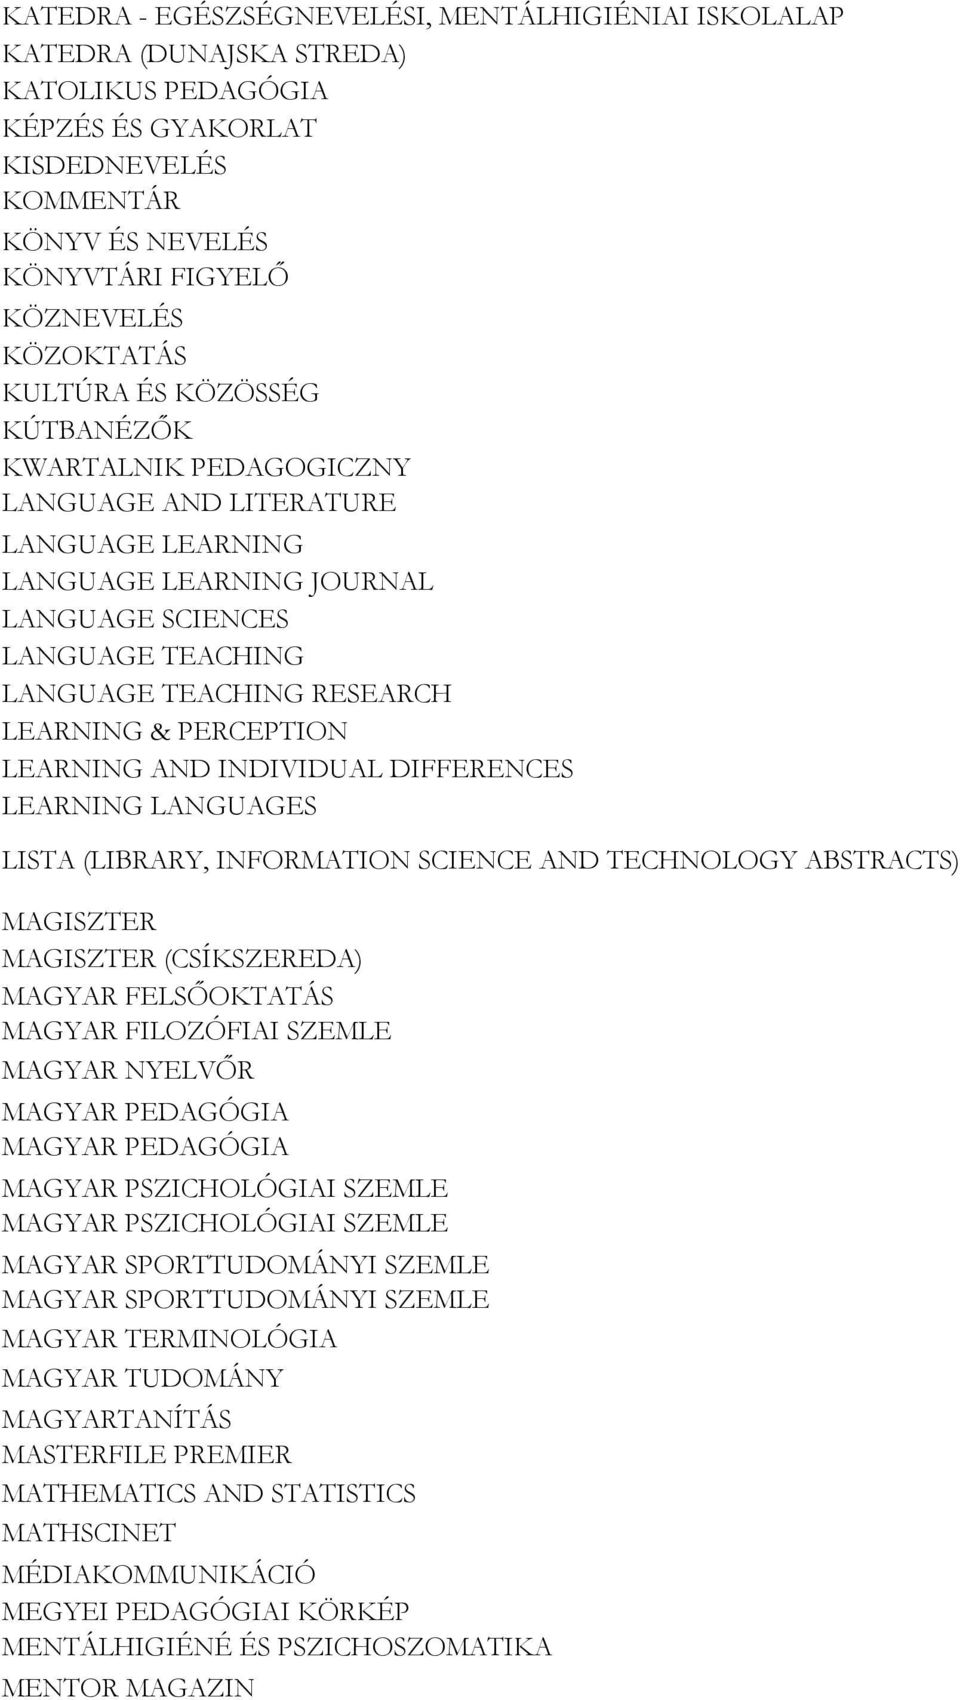 LEARNING & PERCEPTION LEARNING AND INDIVIDUAL DIFFERENCES LEARNING LANGUAGES LISTA (LIBRARY, INFORMATION SCIENCE AND TECHNOLOGY ABSTRACTS) MAGISZTER MAGISZTER (CSÍKSZEREDA) MAGYAR FELSŐOKTATÁS MAGYAR